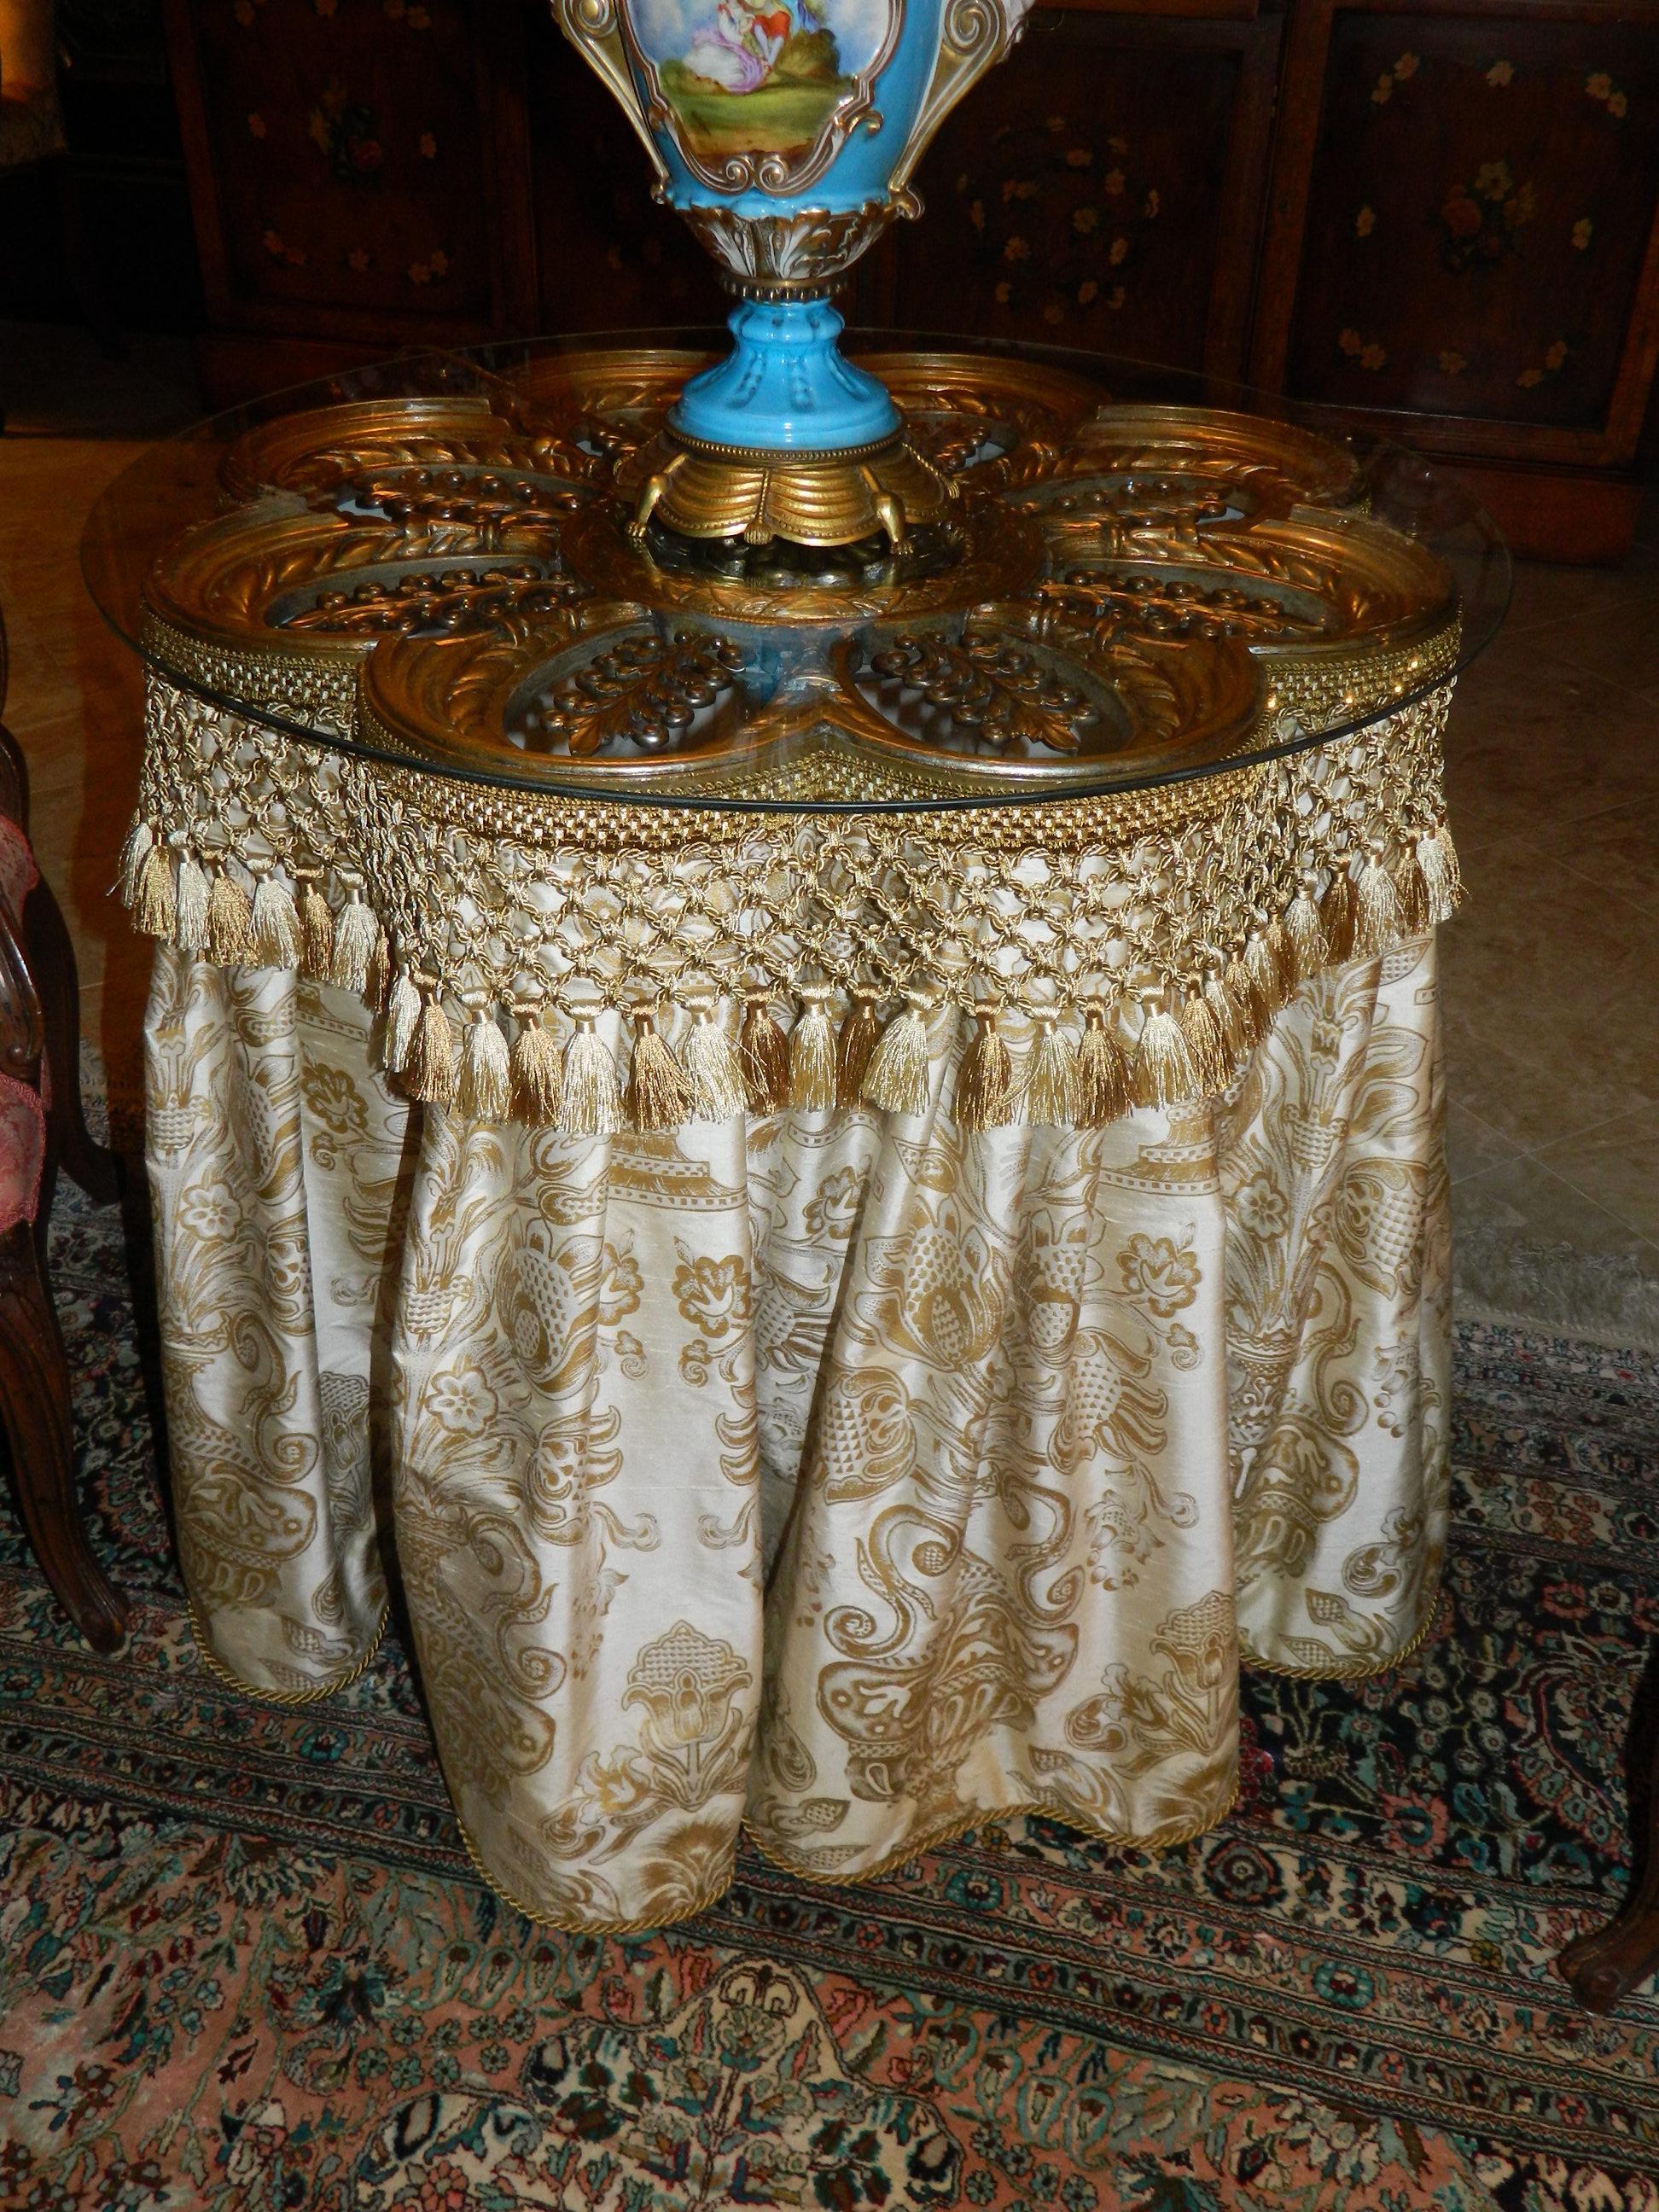 20th century scalloped gold painted metal pedestal table with a silk fabric skirt.